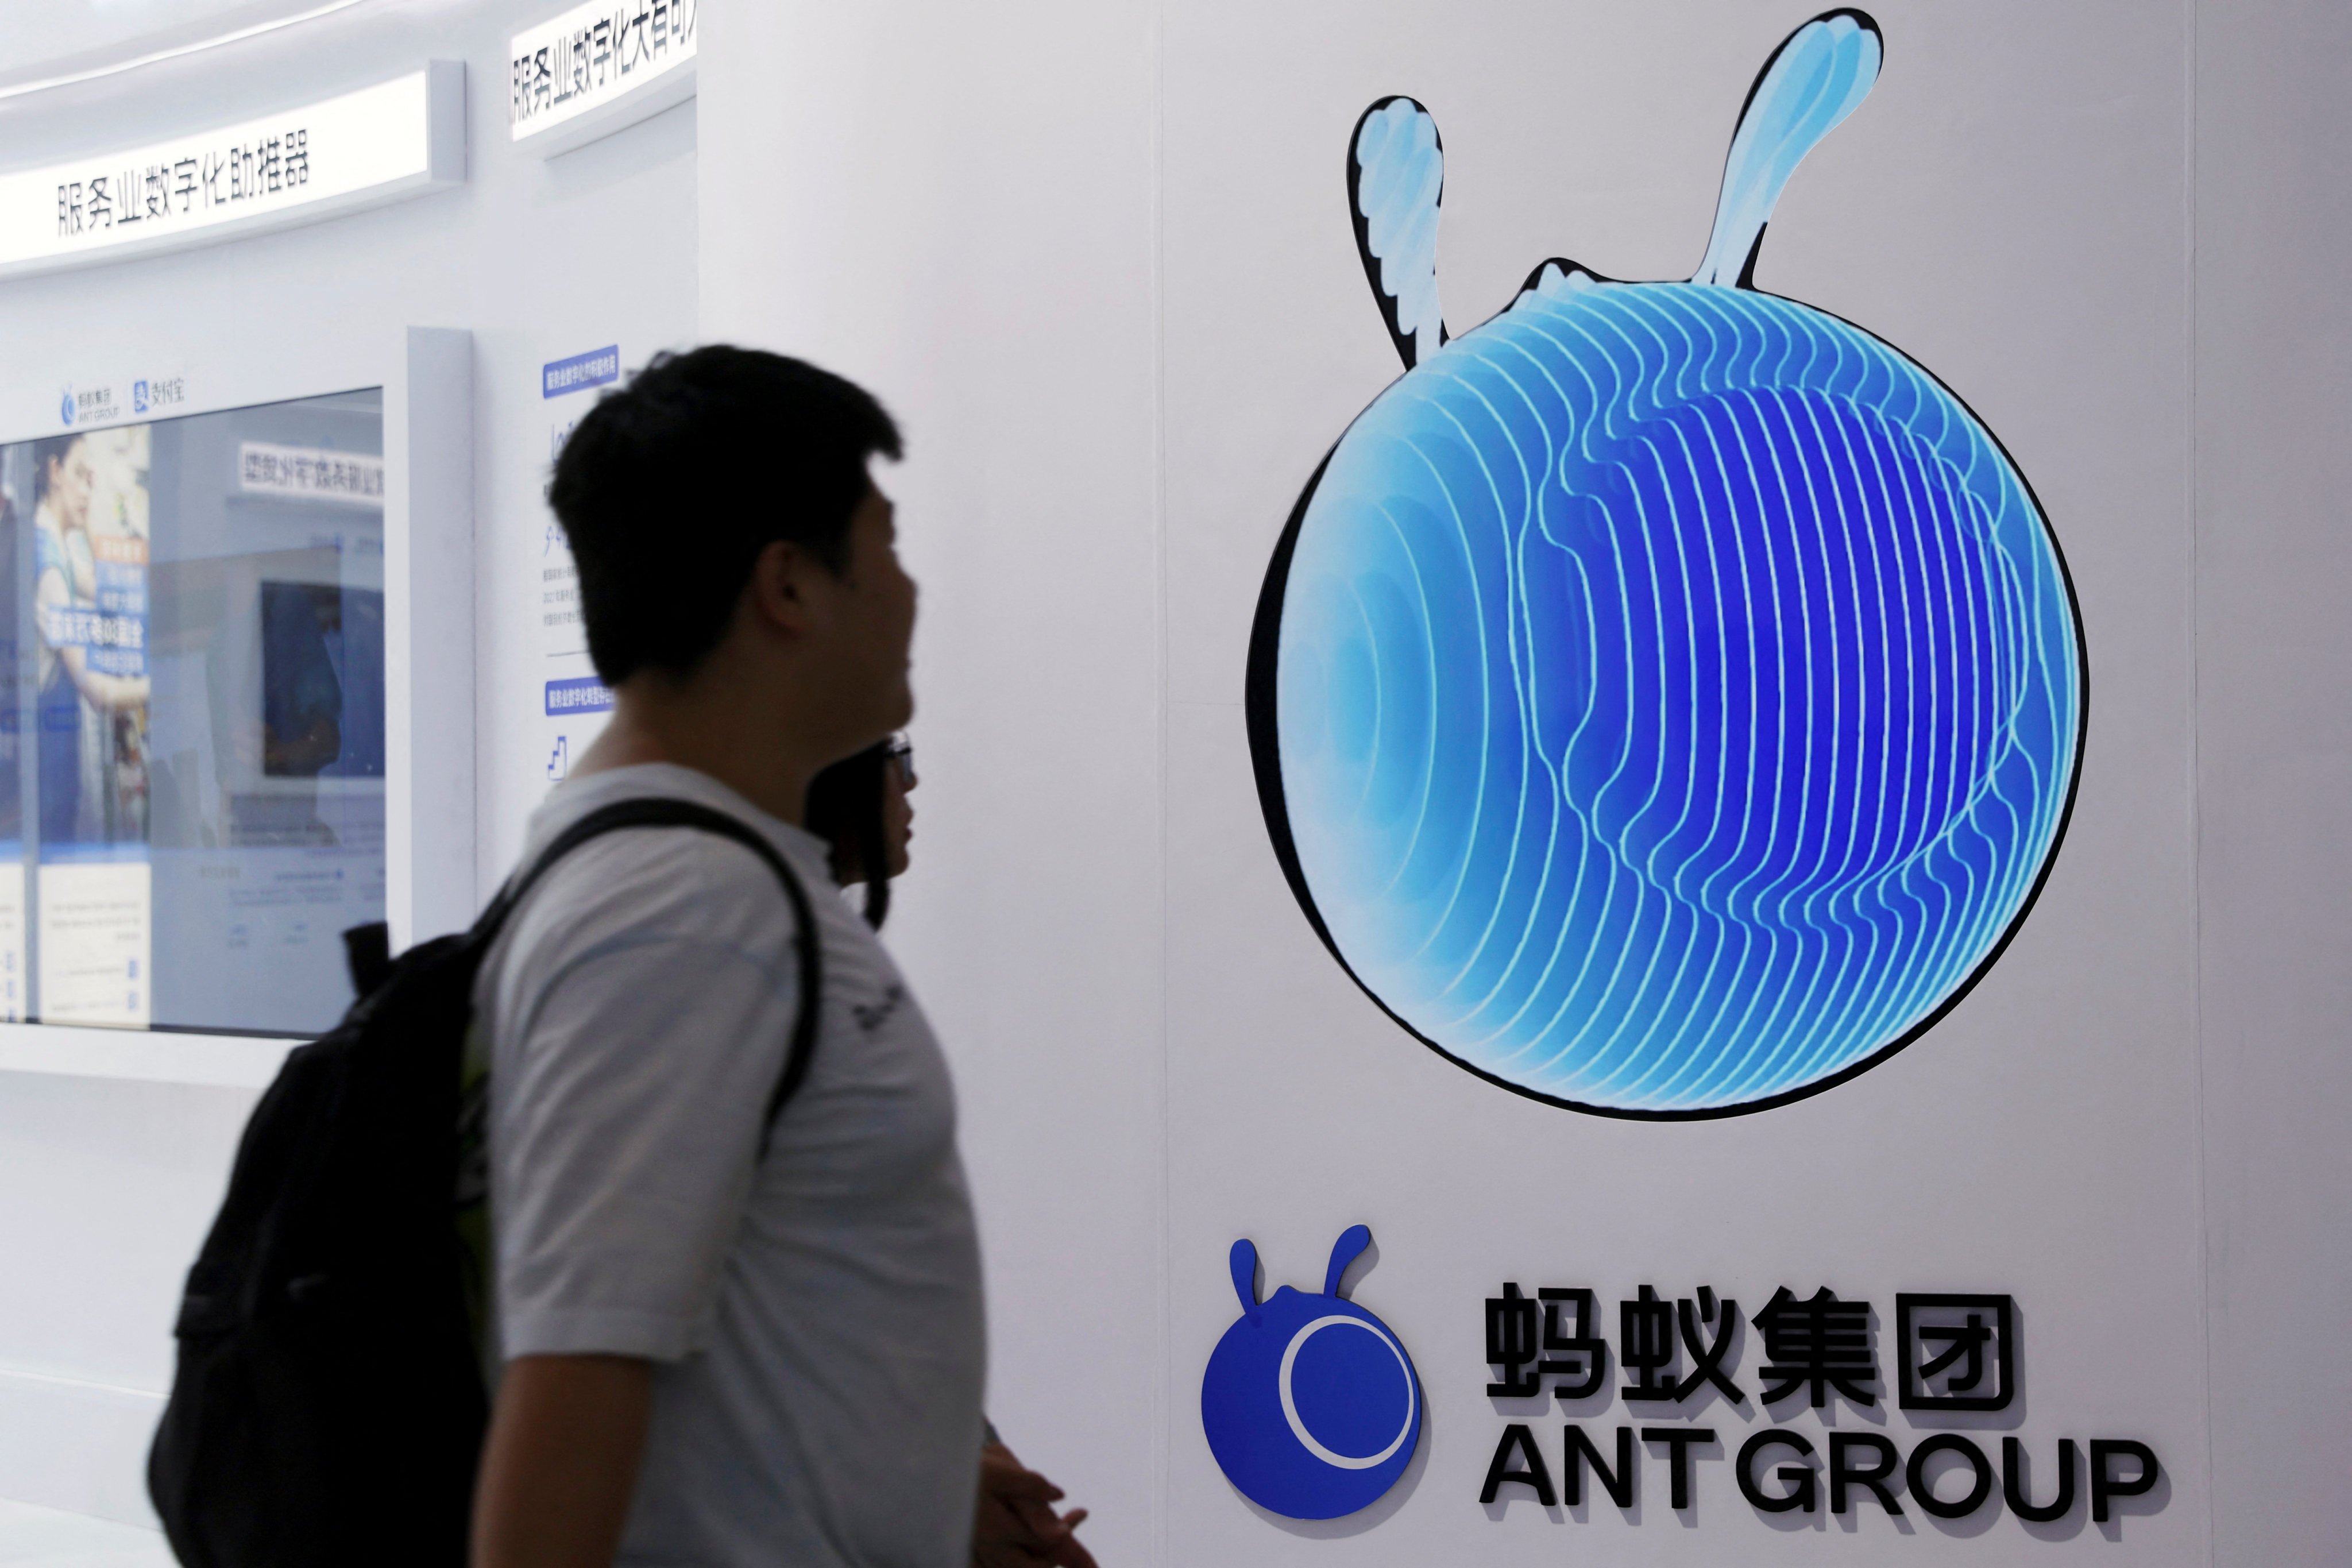 Ant Group has set up a new AI unit, according to people familiar with the matter. Photo: Reuters